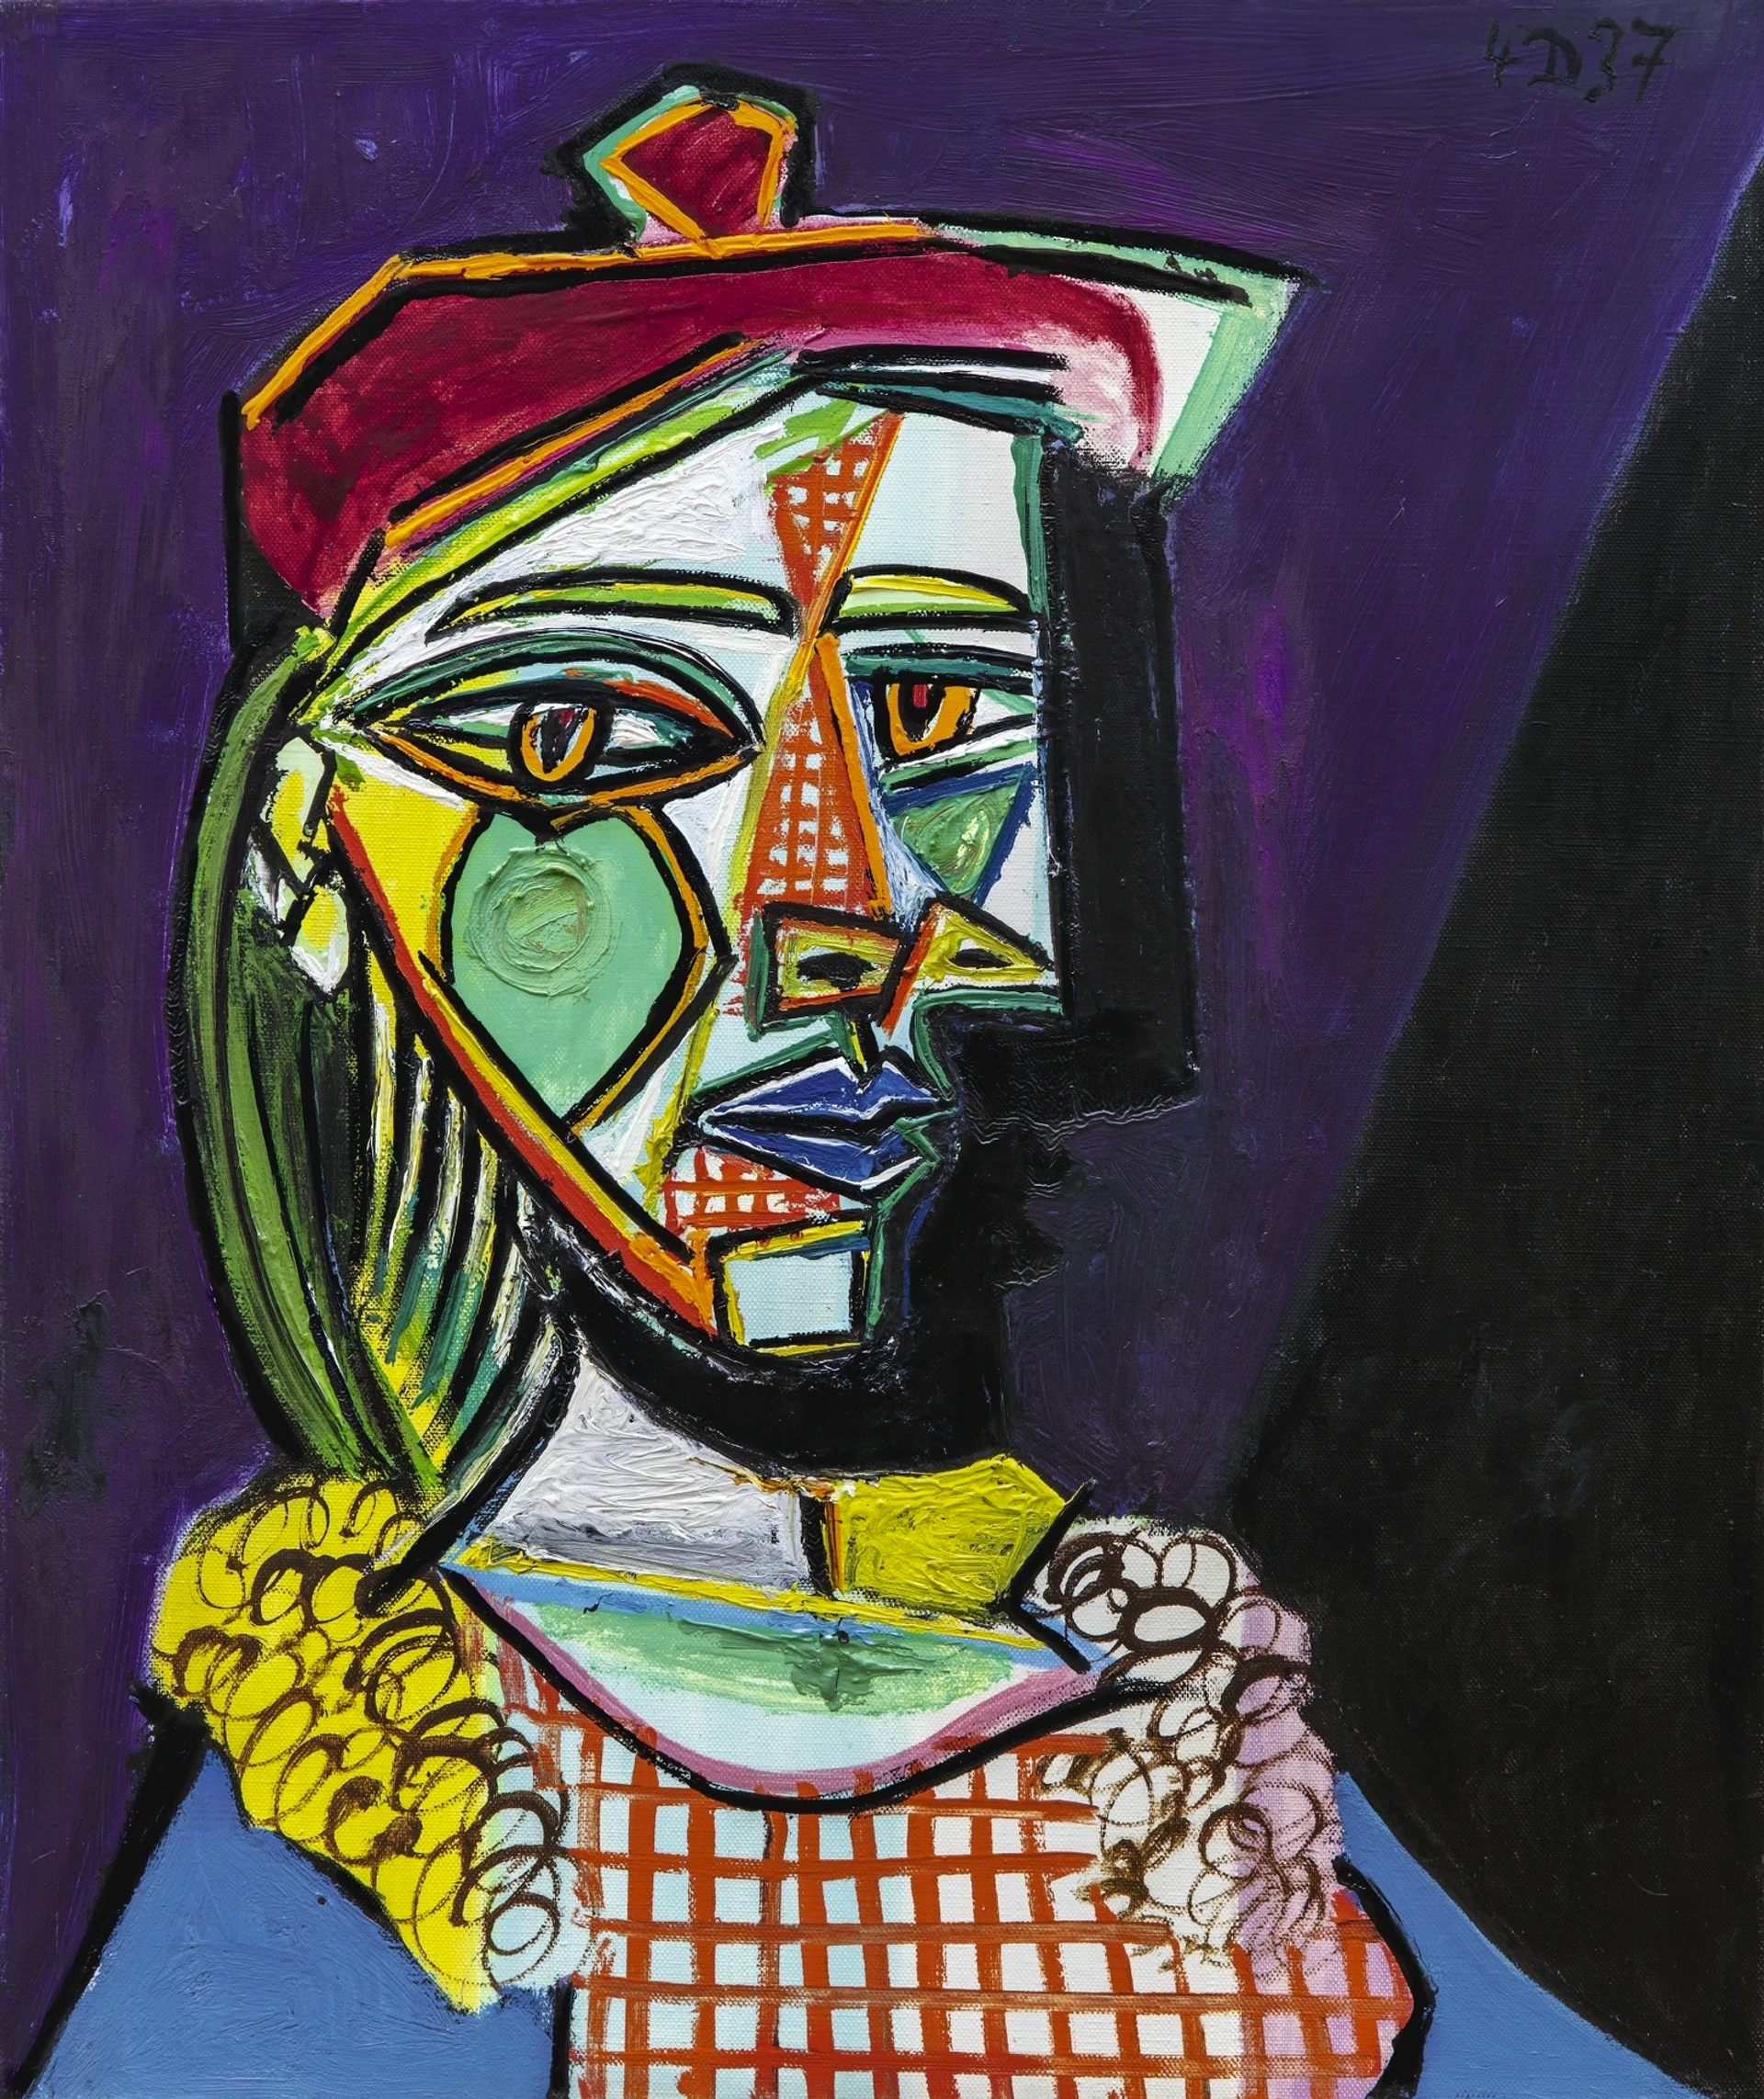 Painted portrait by Pablo Picasso, depicting Marie-Thérese Walter in fragmented angular shapes of green, white, orange, yellow and blue. She is wearing a crimson beret and is sat against a purple and black background.